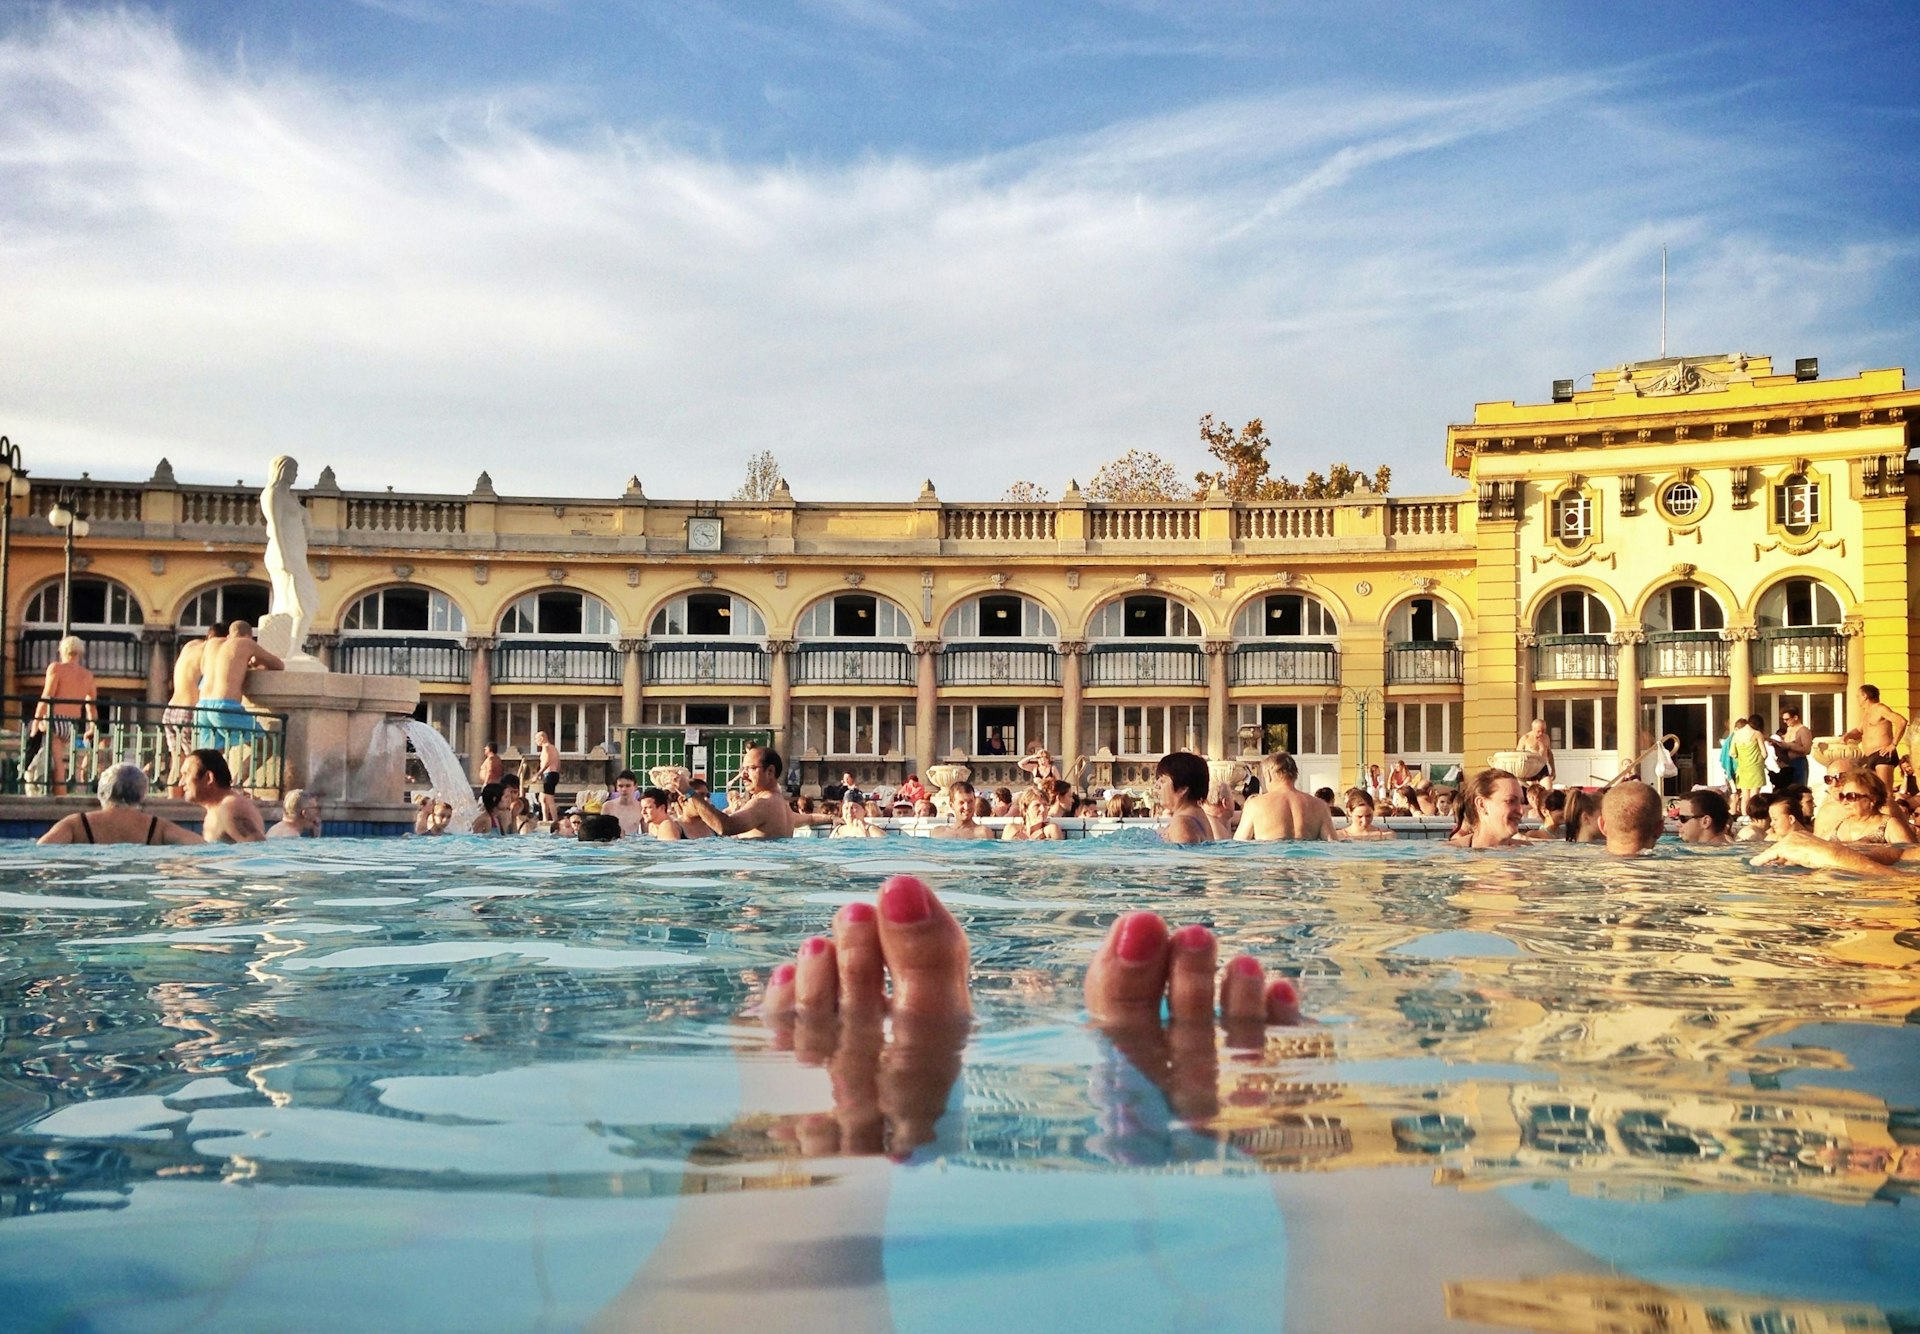 Taken from atop the outdoor pool water, a women's toes float in the pool under bright blue skies whilst in the background, the yellow, neo-classical architecture radiates like a summer sunflower in Southern France.